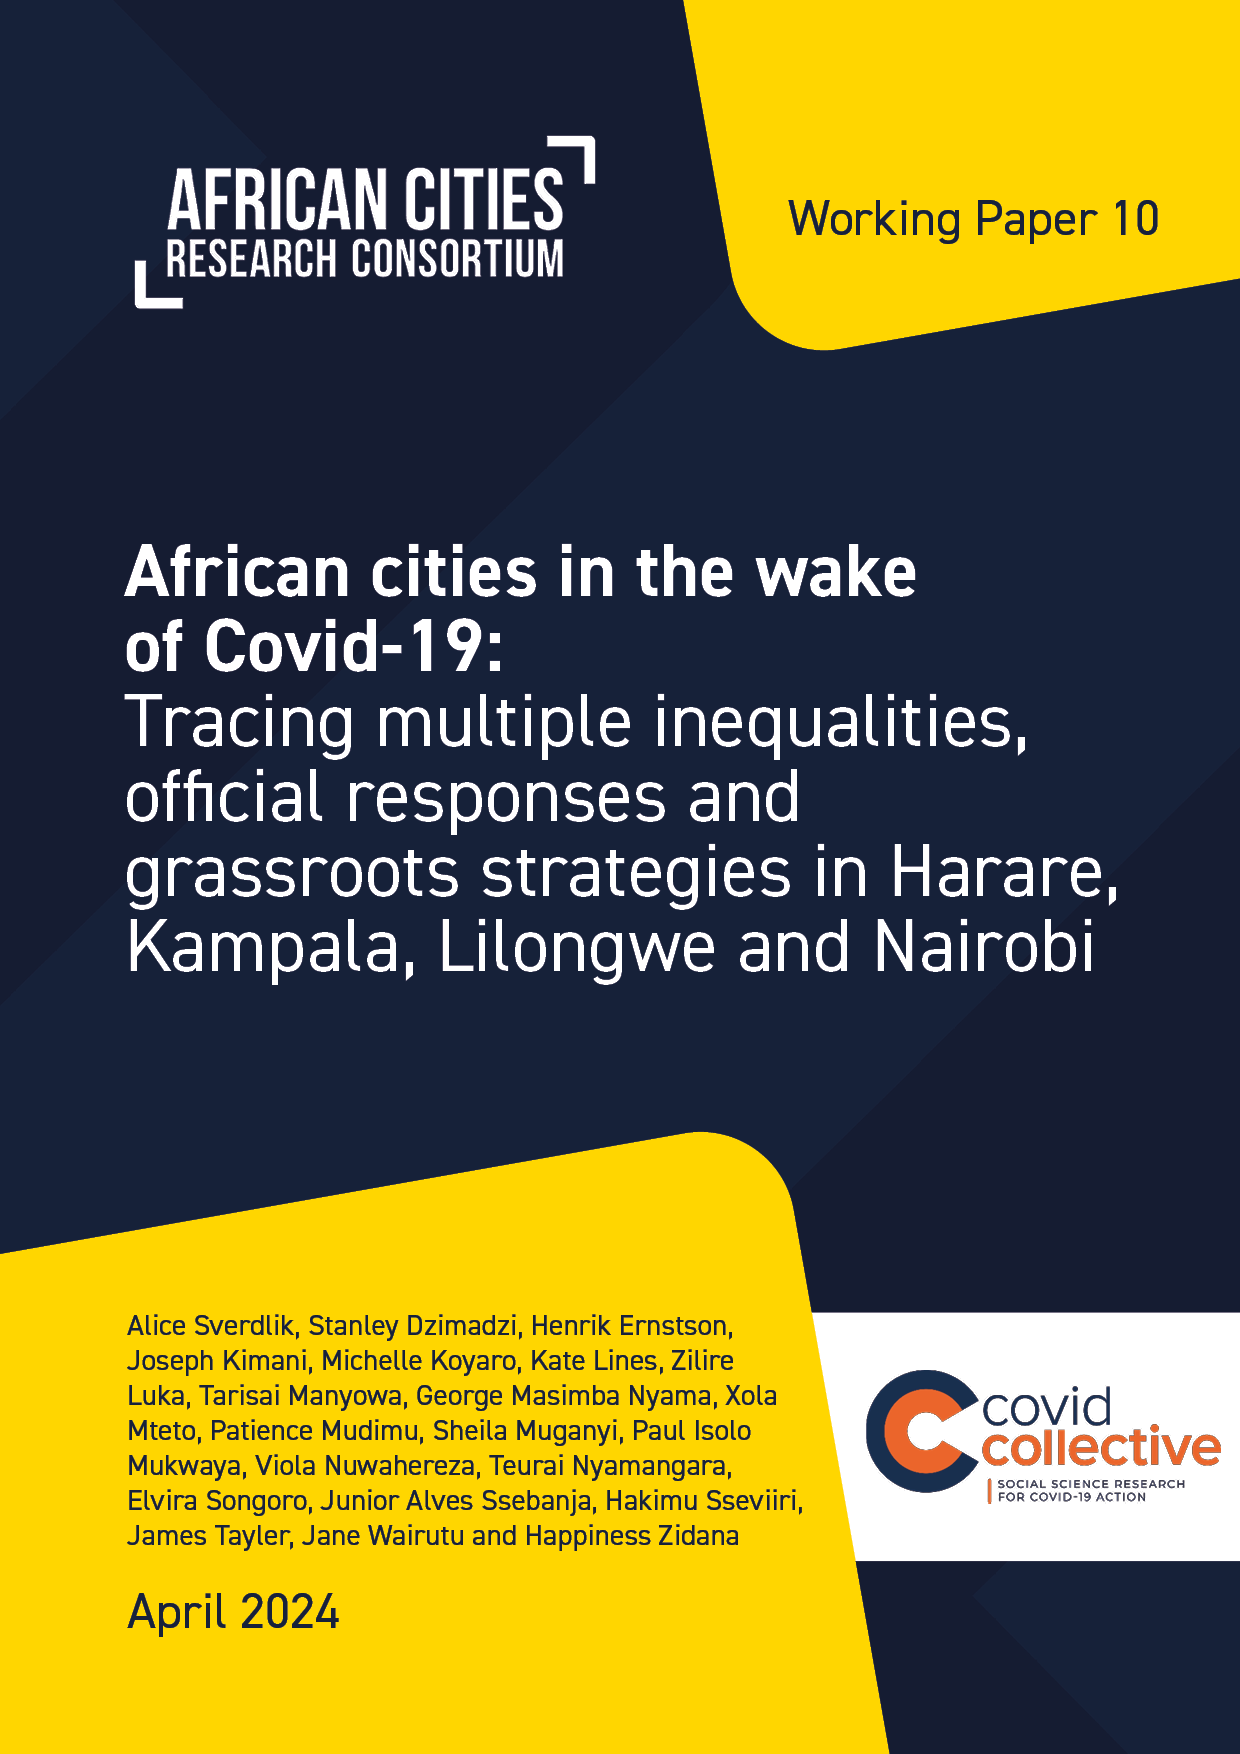 Working Paper 10 | African cities in the wake of Covid-19: Tracing multiple inequalities, official responses and grassroots strategies in Harare, Kampala, Lilongwe and Nairobi